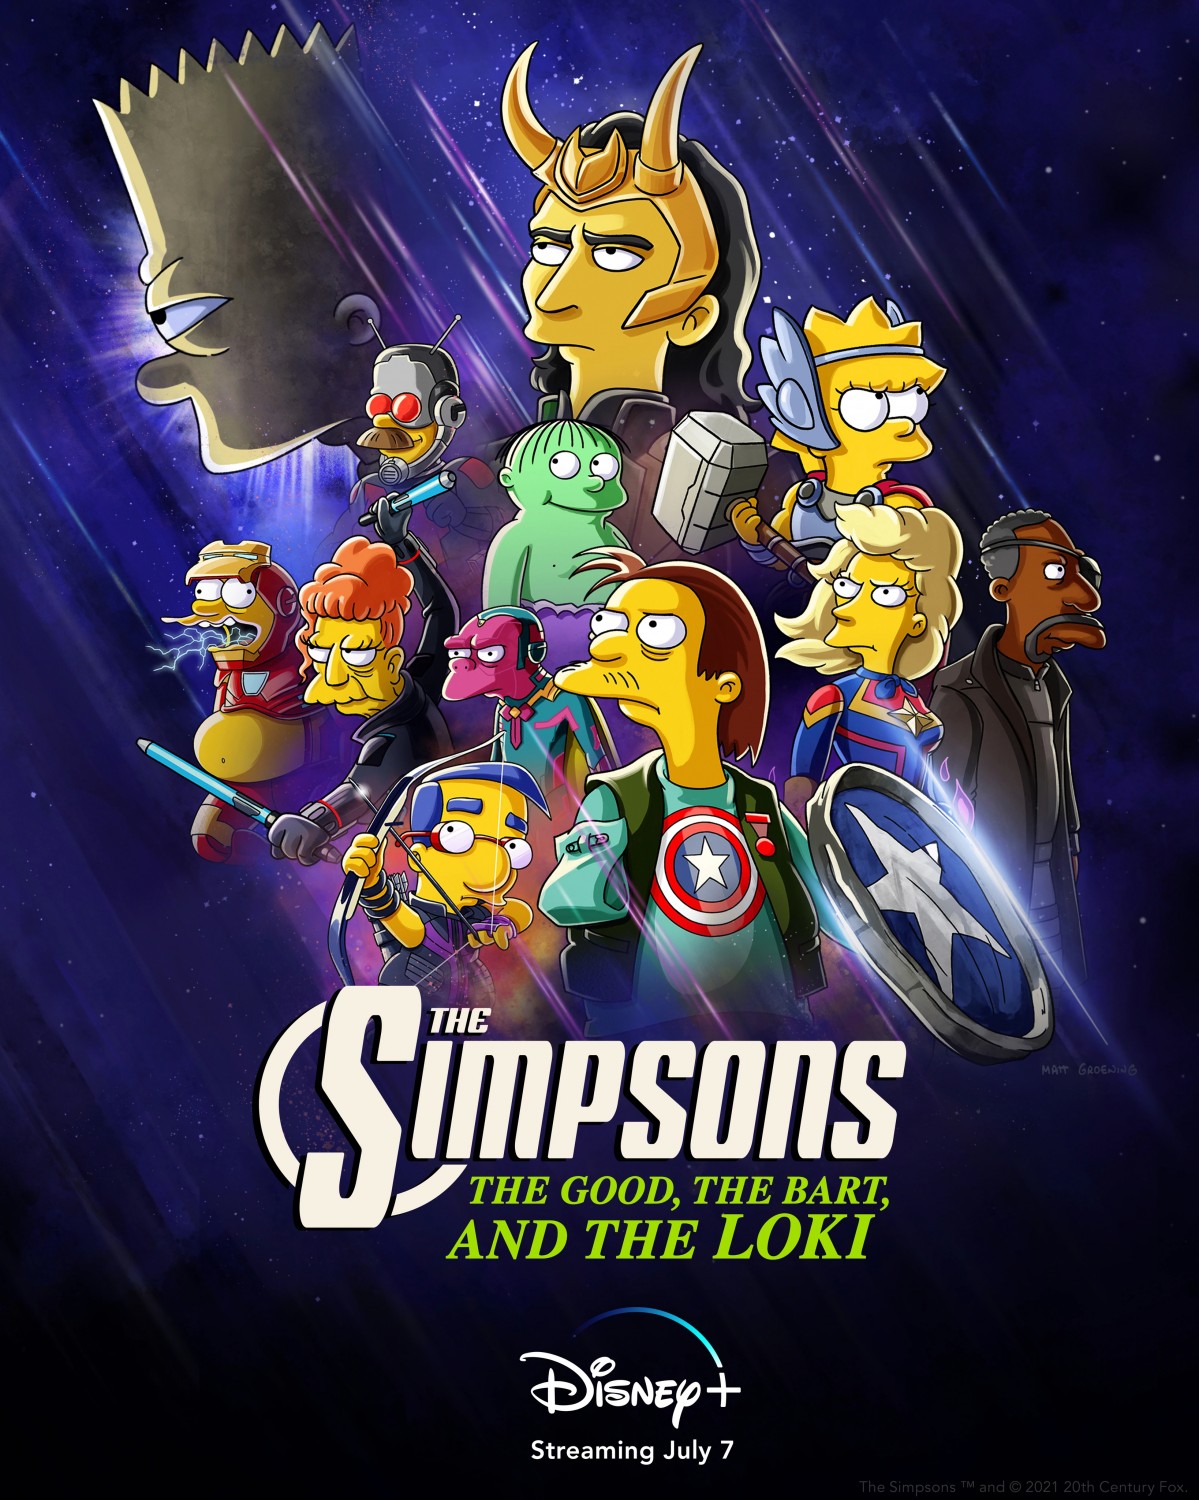 Extra Large Movie Poster Image for The Good, the Bart, and the Loki